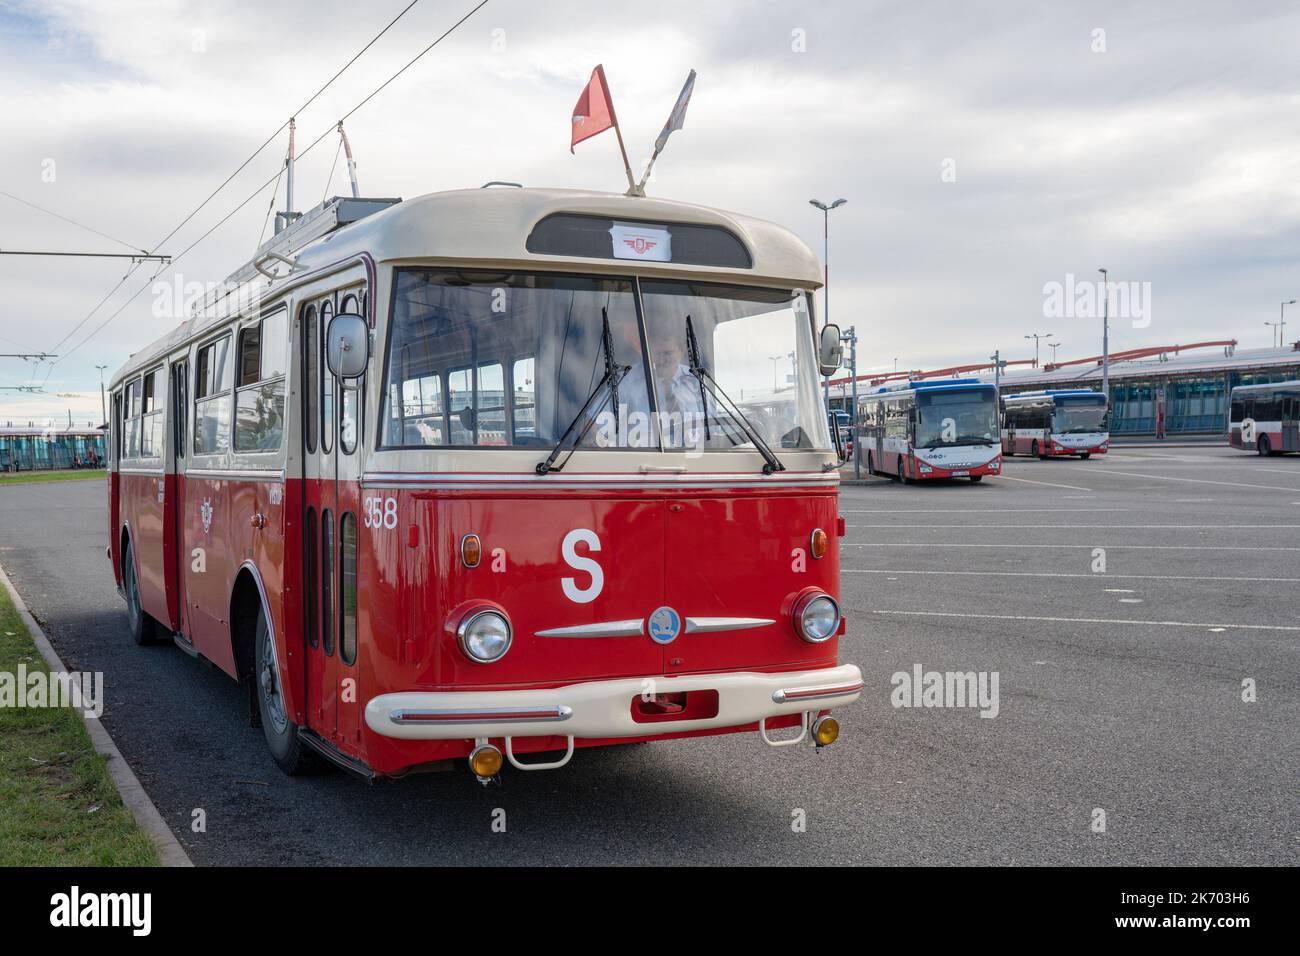 Czech trolleybus on public display in the open. Škoda 9Tr type produced from 1950s to 1980s. Stock Photo